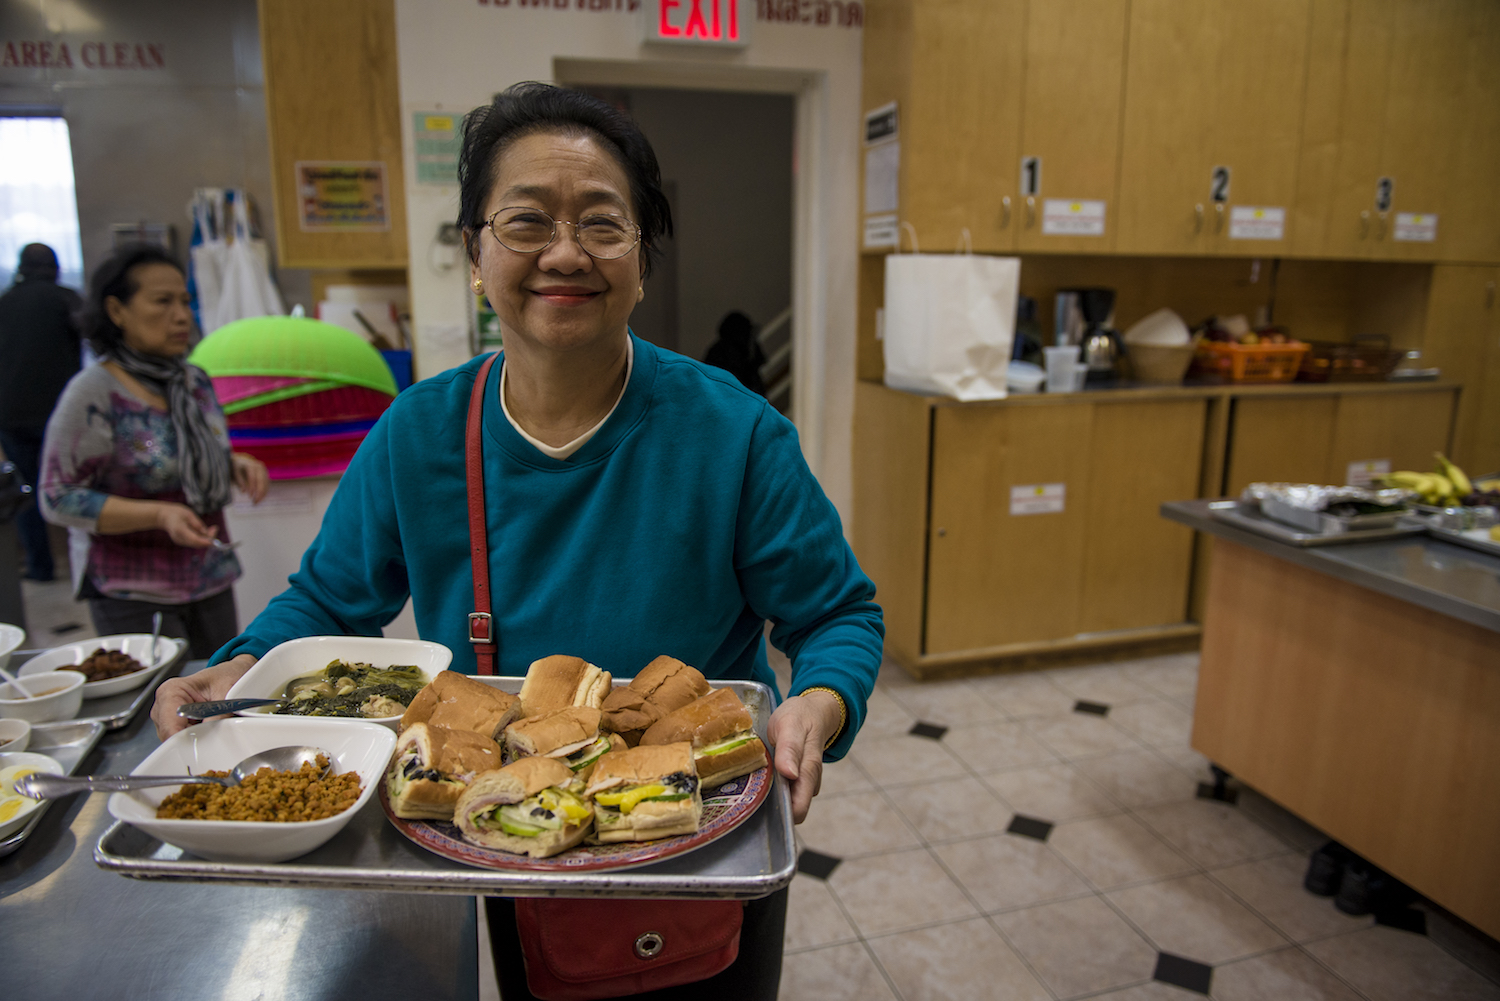 Jeannie Ongkeo cooks for the monks and worshippers at the Wat Buddha Thai Thavorn Vanaram temple in Elmhurst.